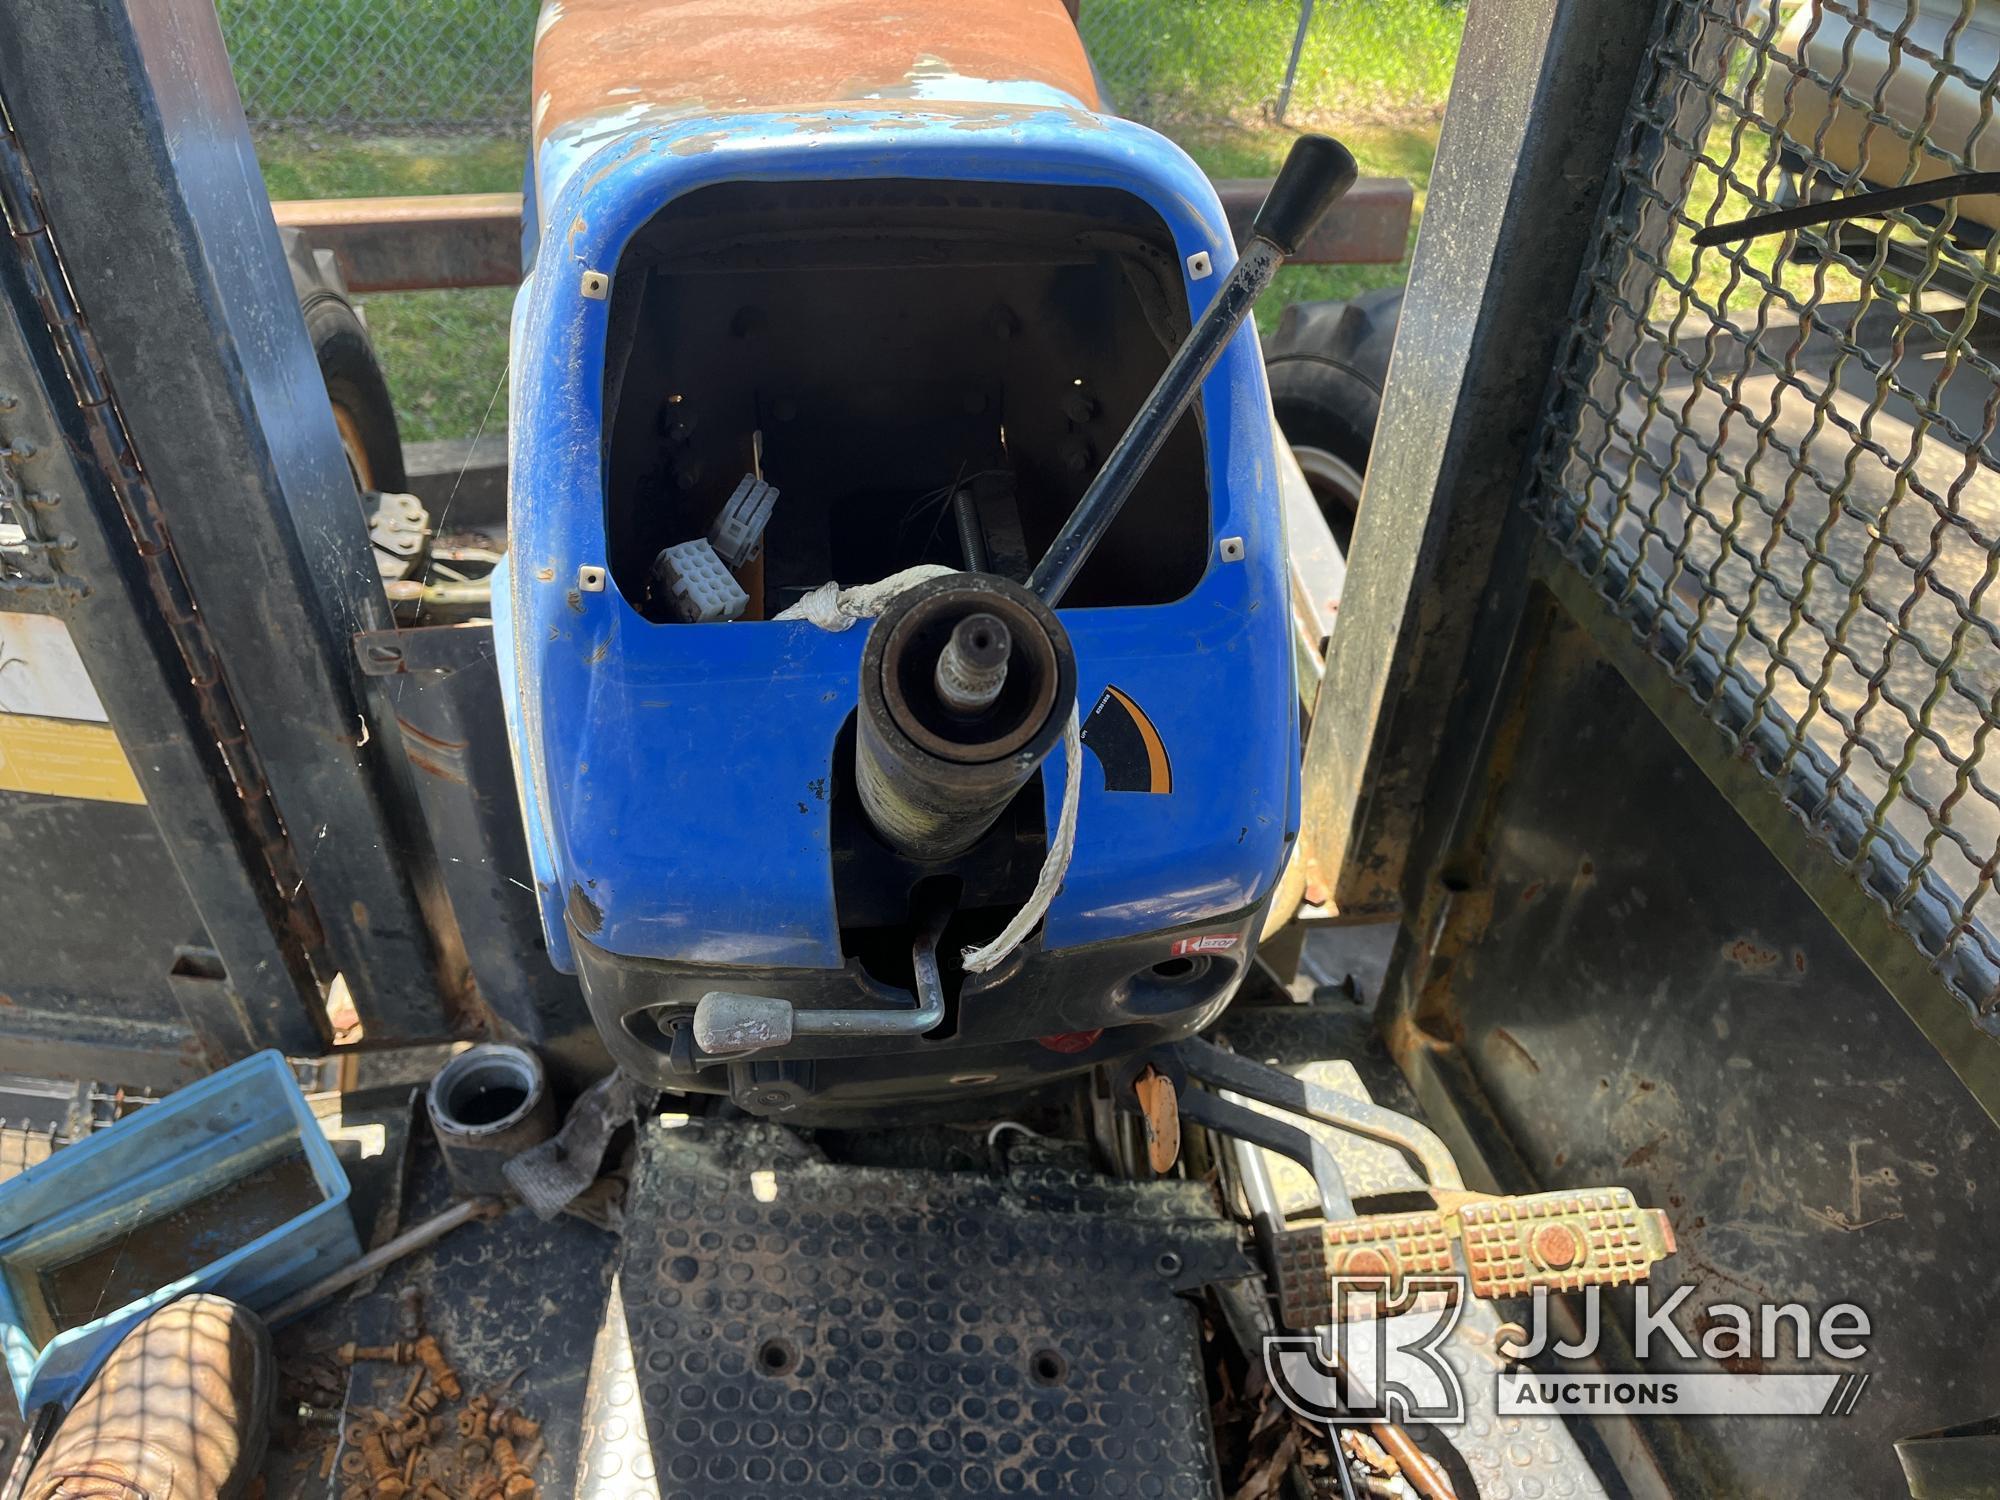 (Lagrange, GA) New Holland TB120 4x4 Utility Tractor Not Running, Condition Unknown) (Flat Tire